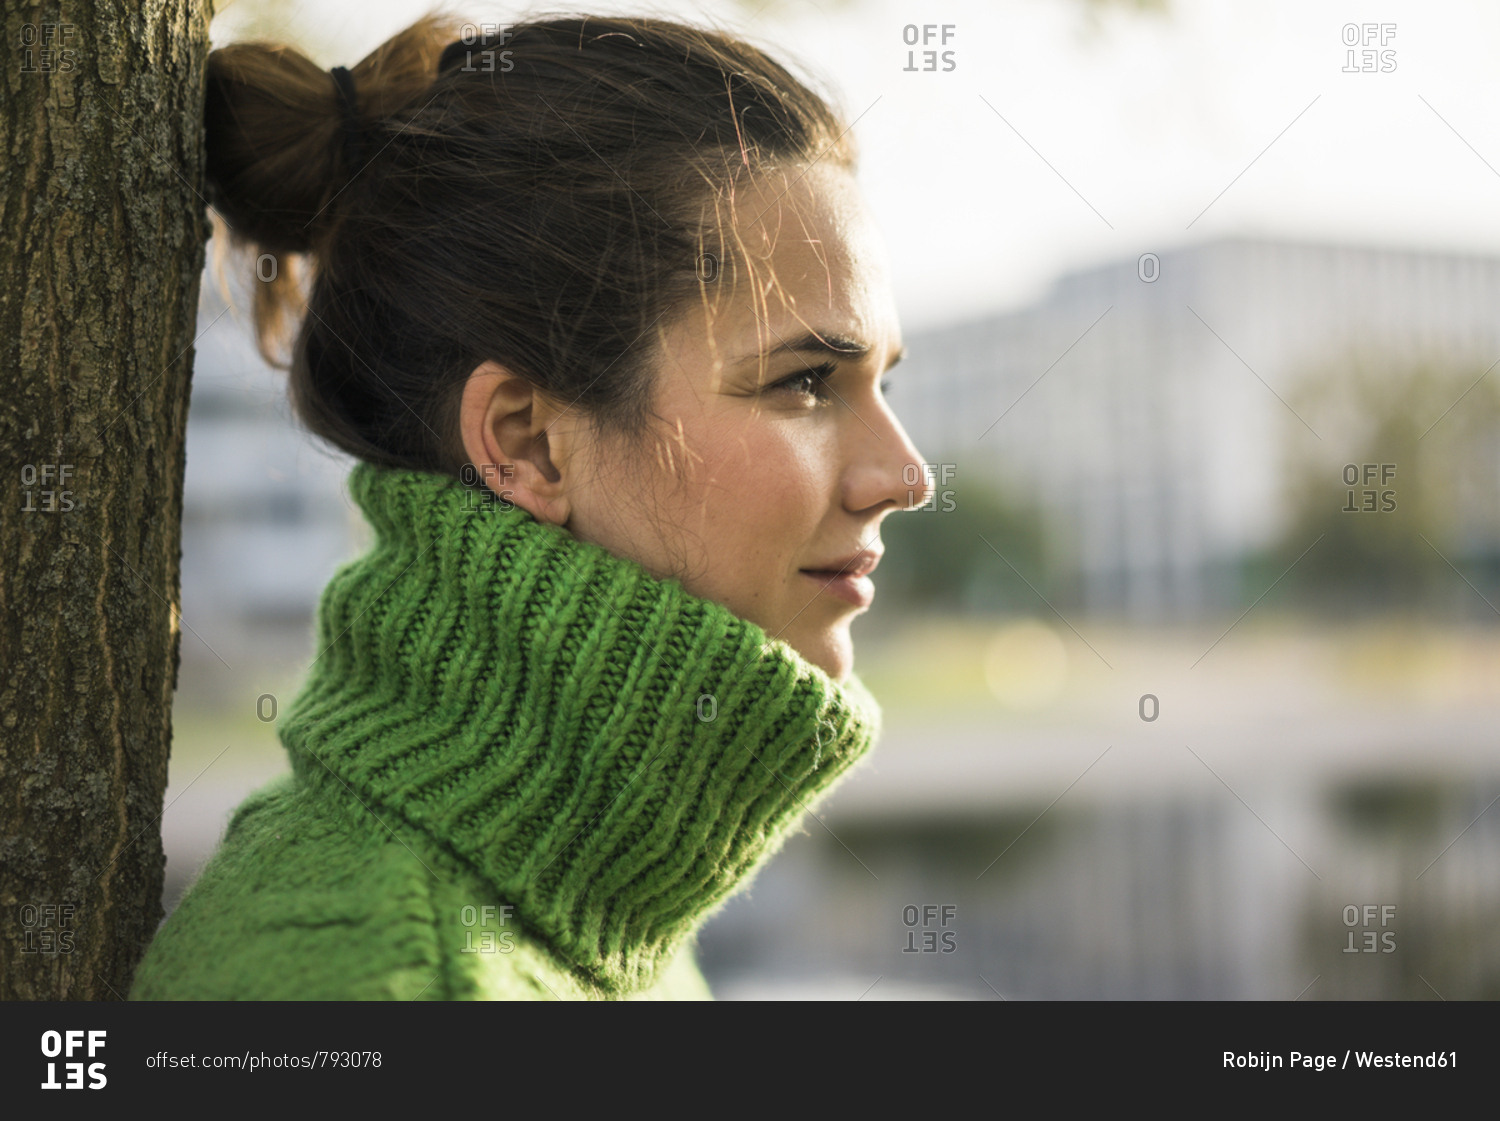 Profile of relaxed woman wearing green turtleneck pullover leaning against tree trunk